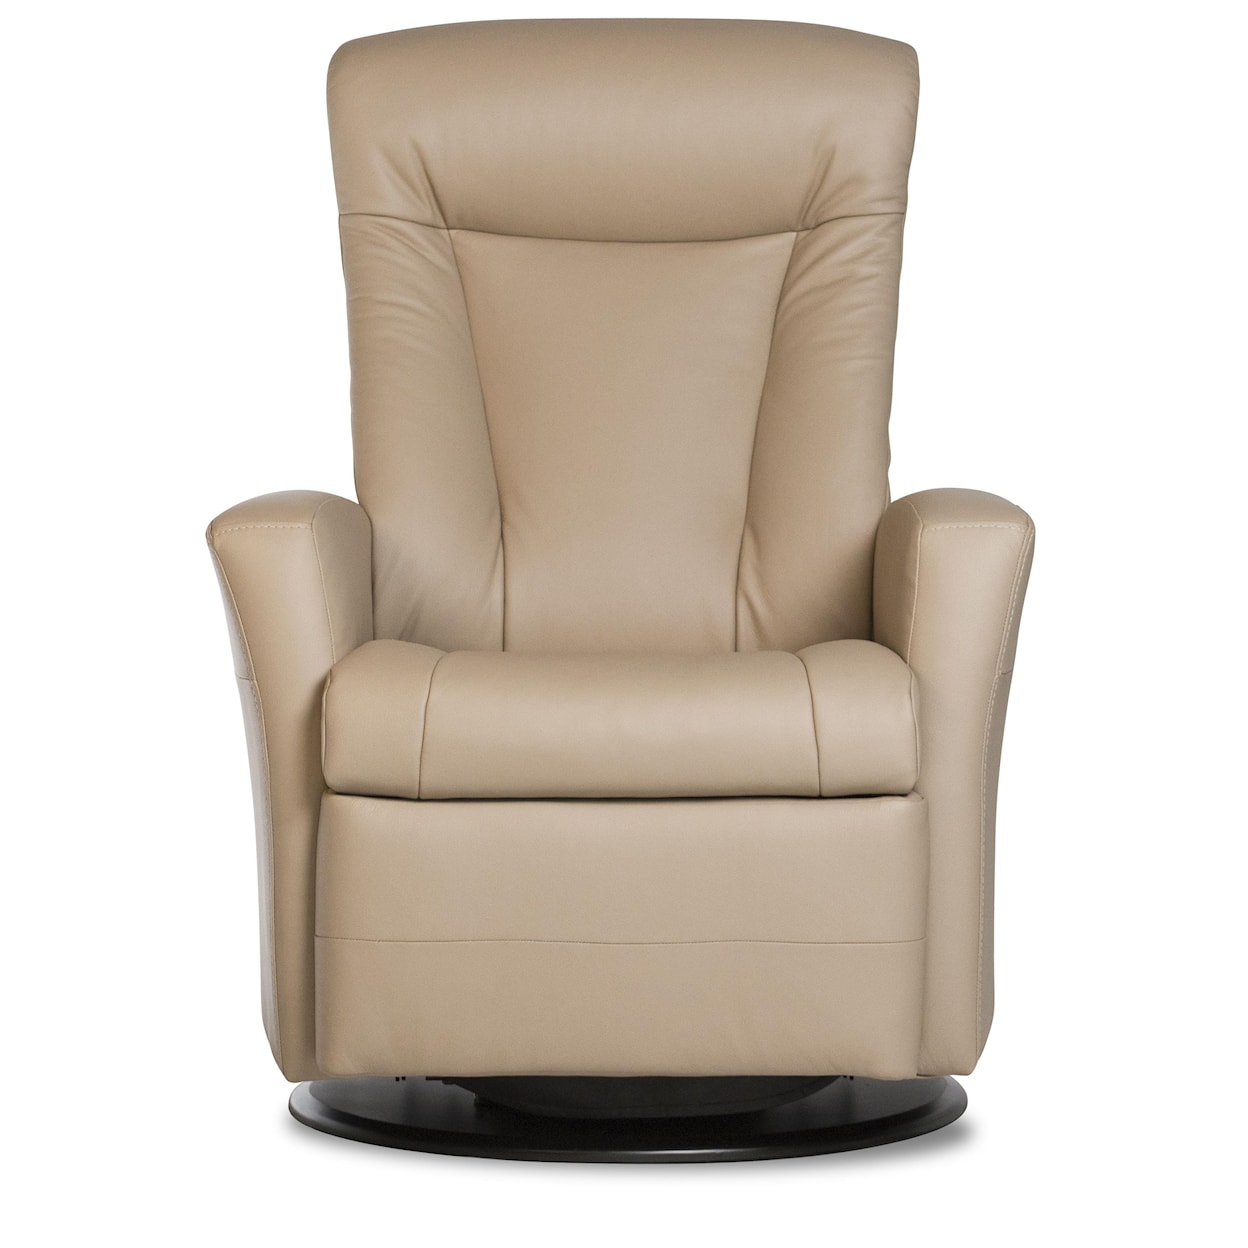 IMG Norway Prince  Prince Relaxer Recliner in Large Size